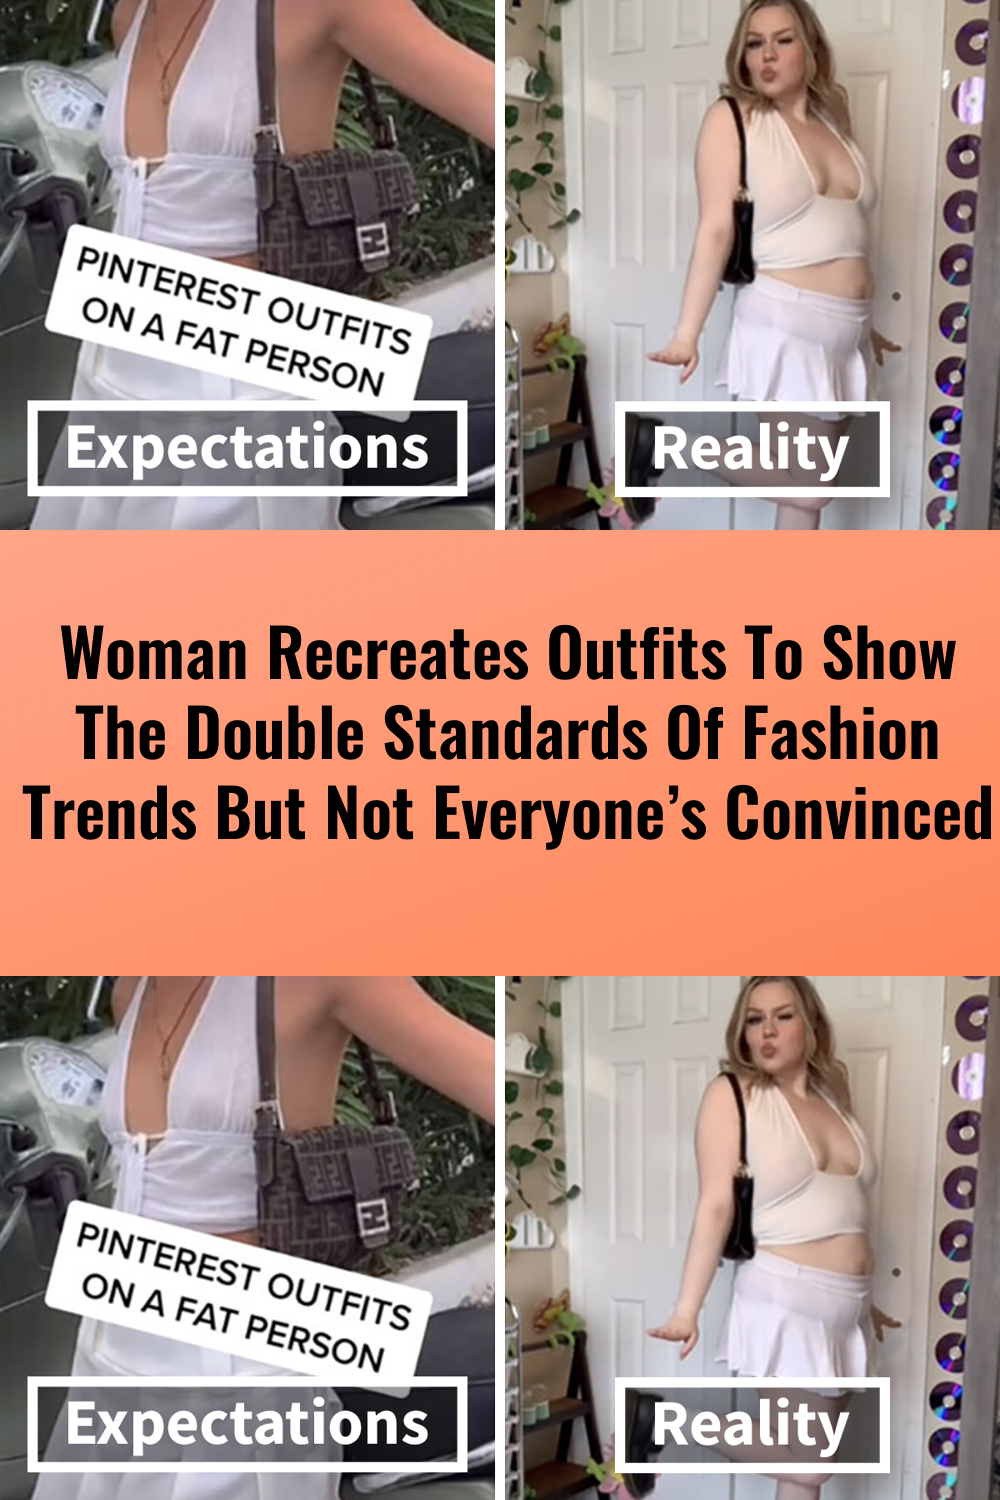 Woman Recreates Outfits To Show The Double Standards Of Fashion Trends, But Not Everyone’s Convinced